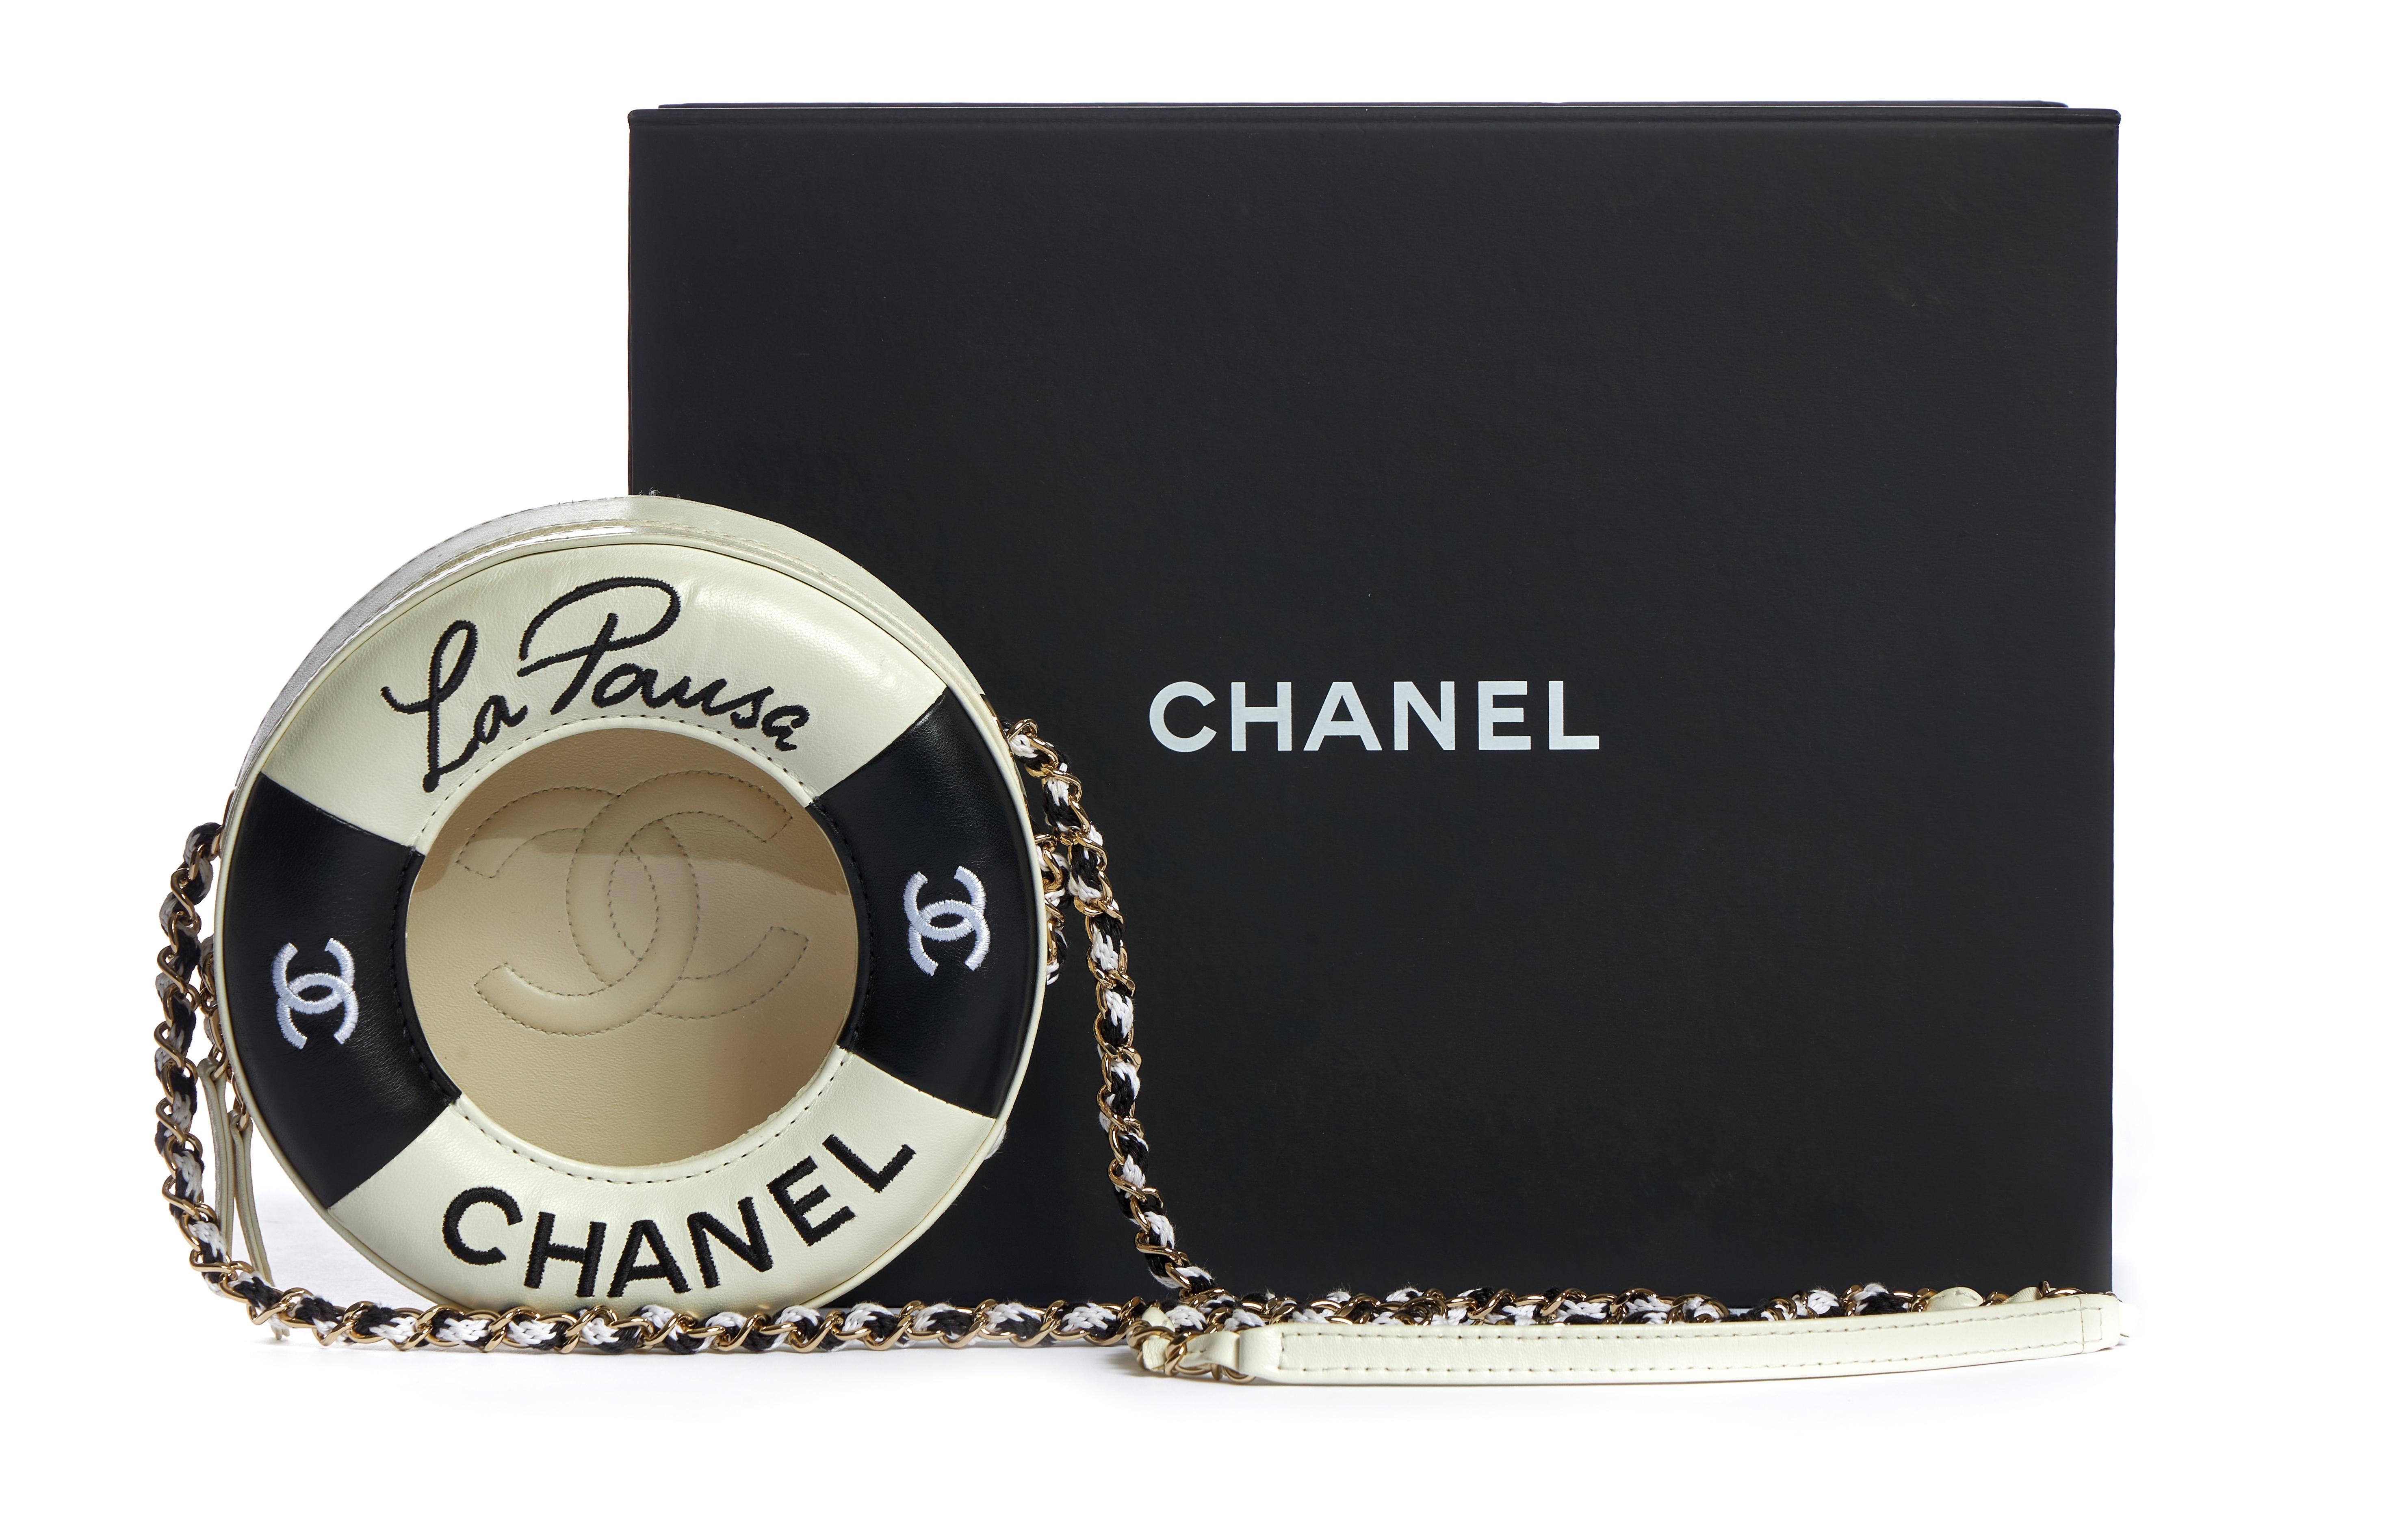 Chanel limited edition runway cruise collection cross body bag. Black and white lambskin leather with pvc transparent center and gold tone hardware. Two minor marks (please refer to photo number 5). Comes with hologram, id card, booklet, dust cover